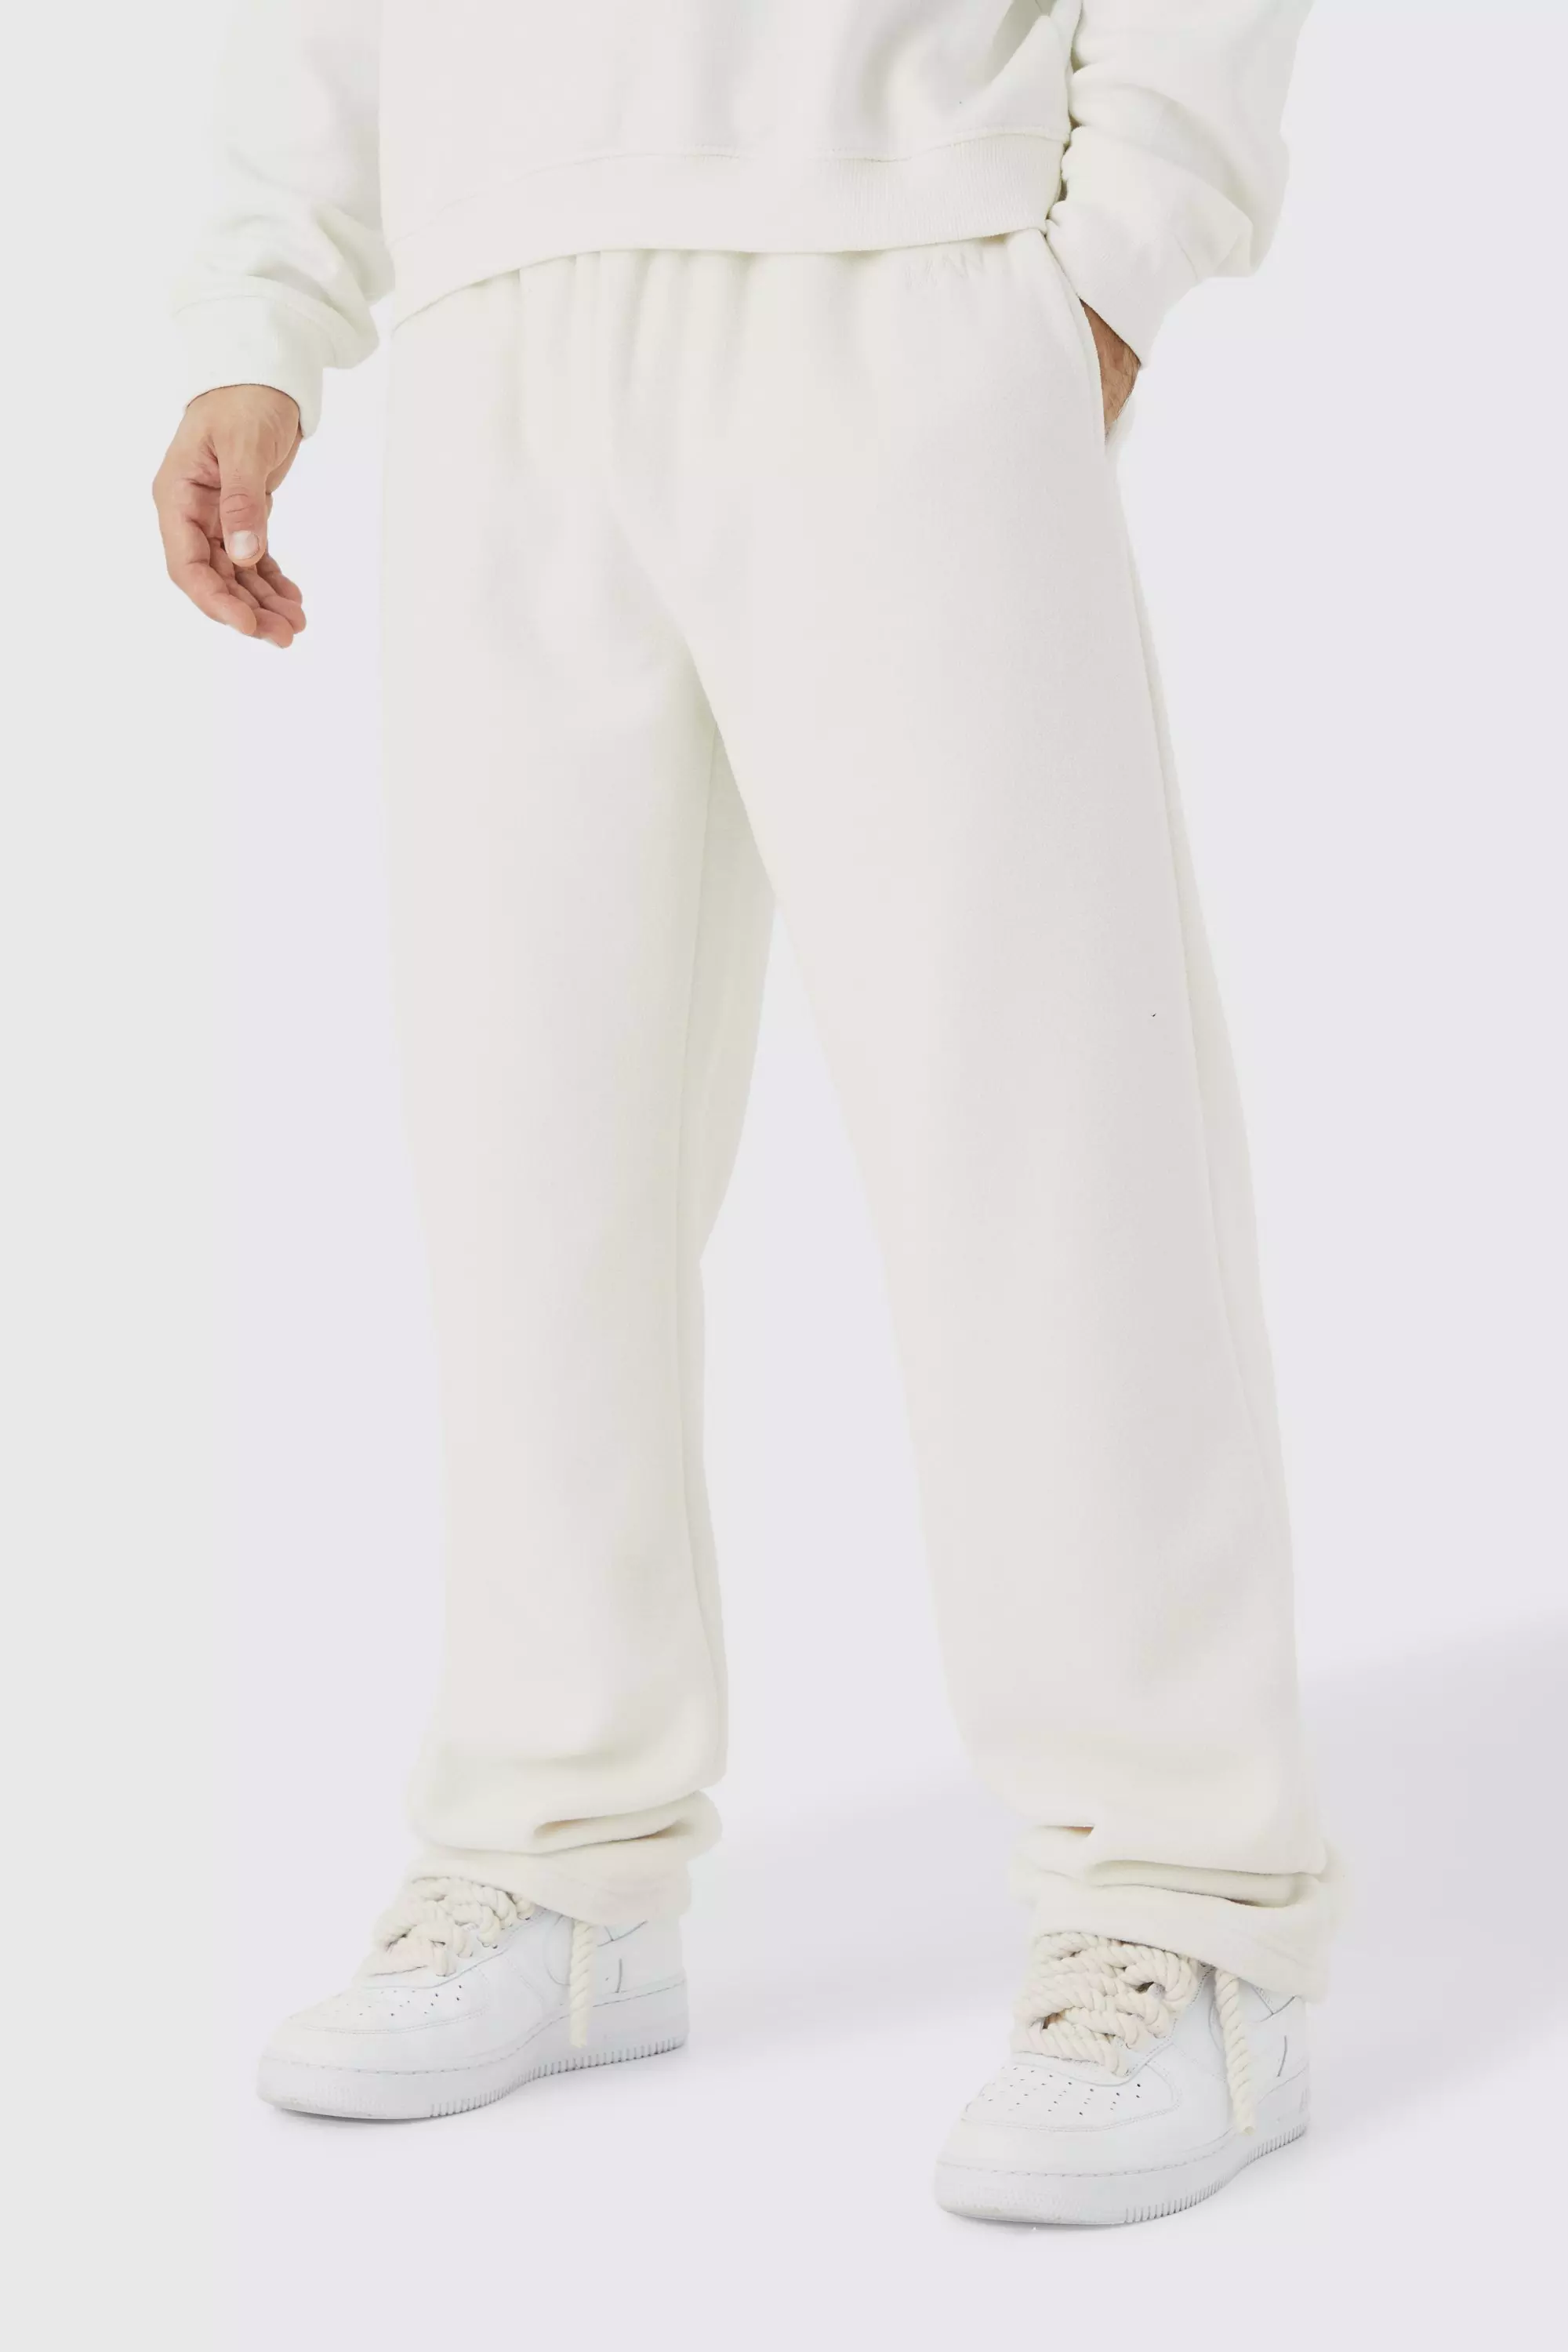 Buy online White Cotton Joggers from Bottom Wear for Men by Ivoc for ₹929  at 54% off